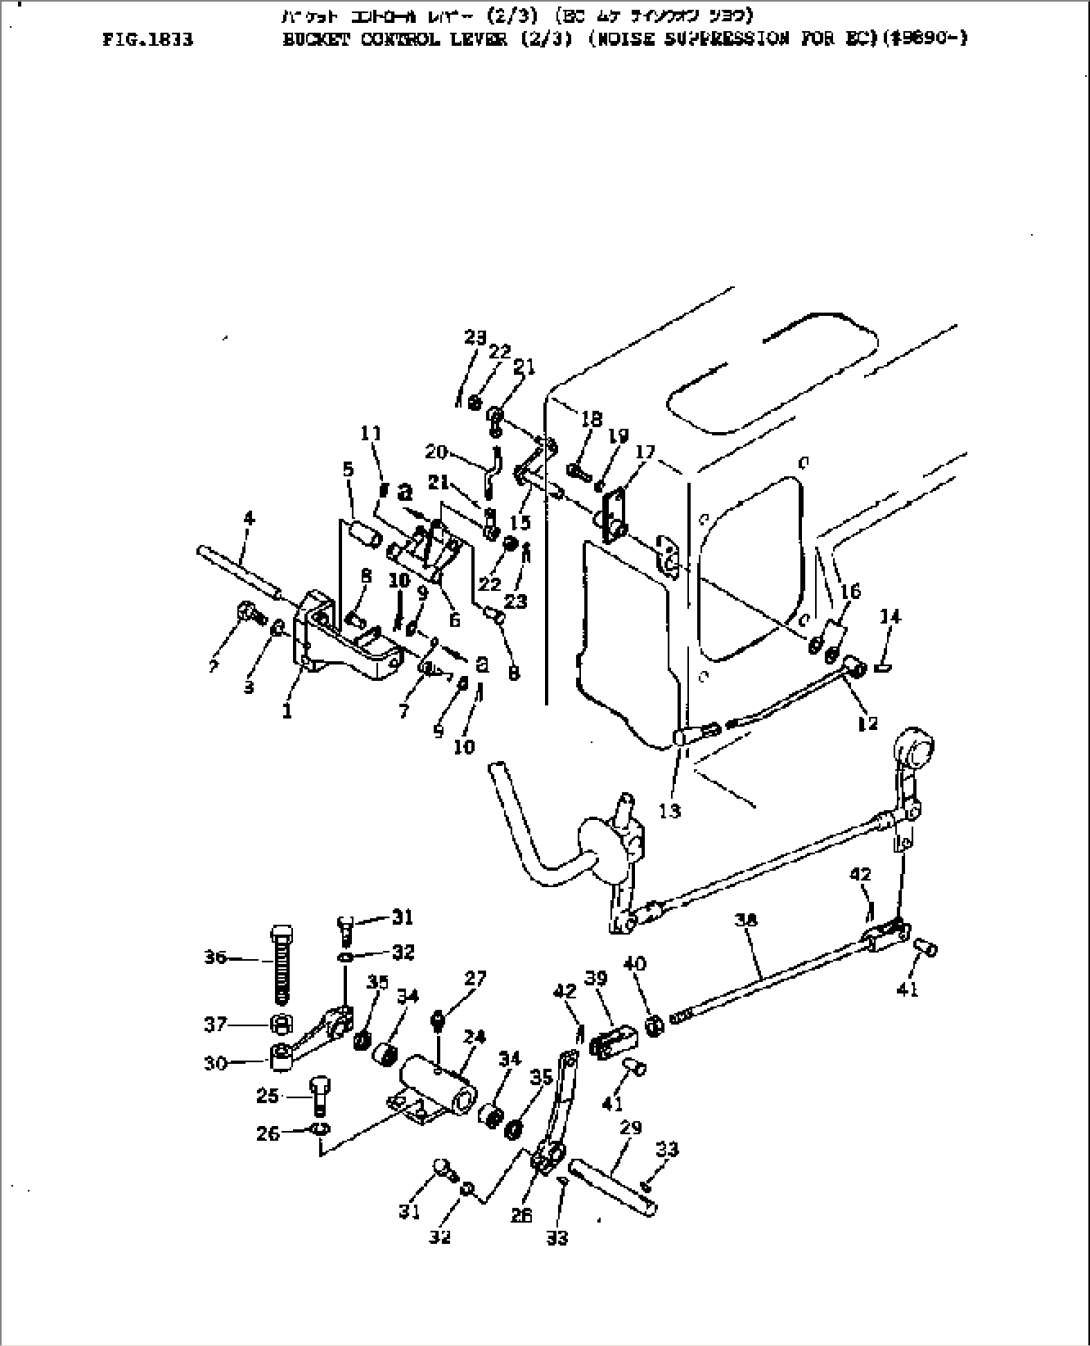 BUCKET CONTROL LEVER (2/3) (NOISE SUPPRESSION FOR EC)(#9890-)